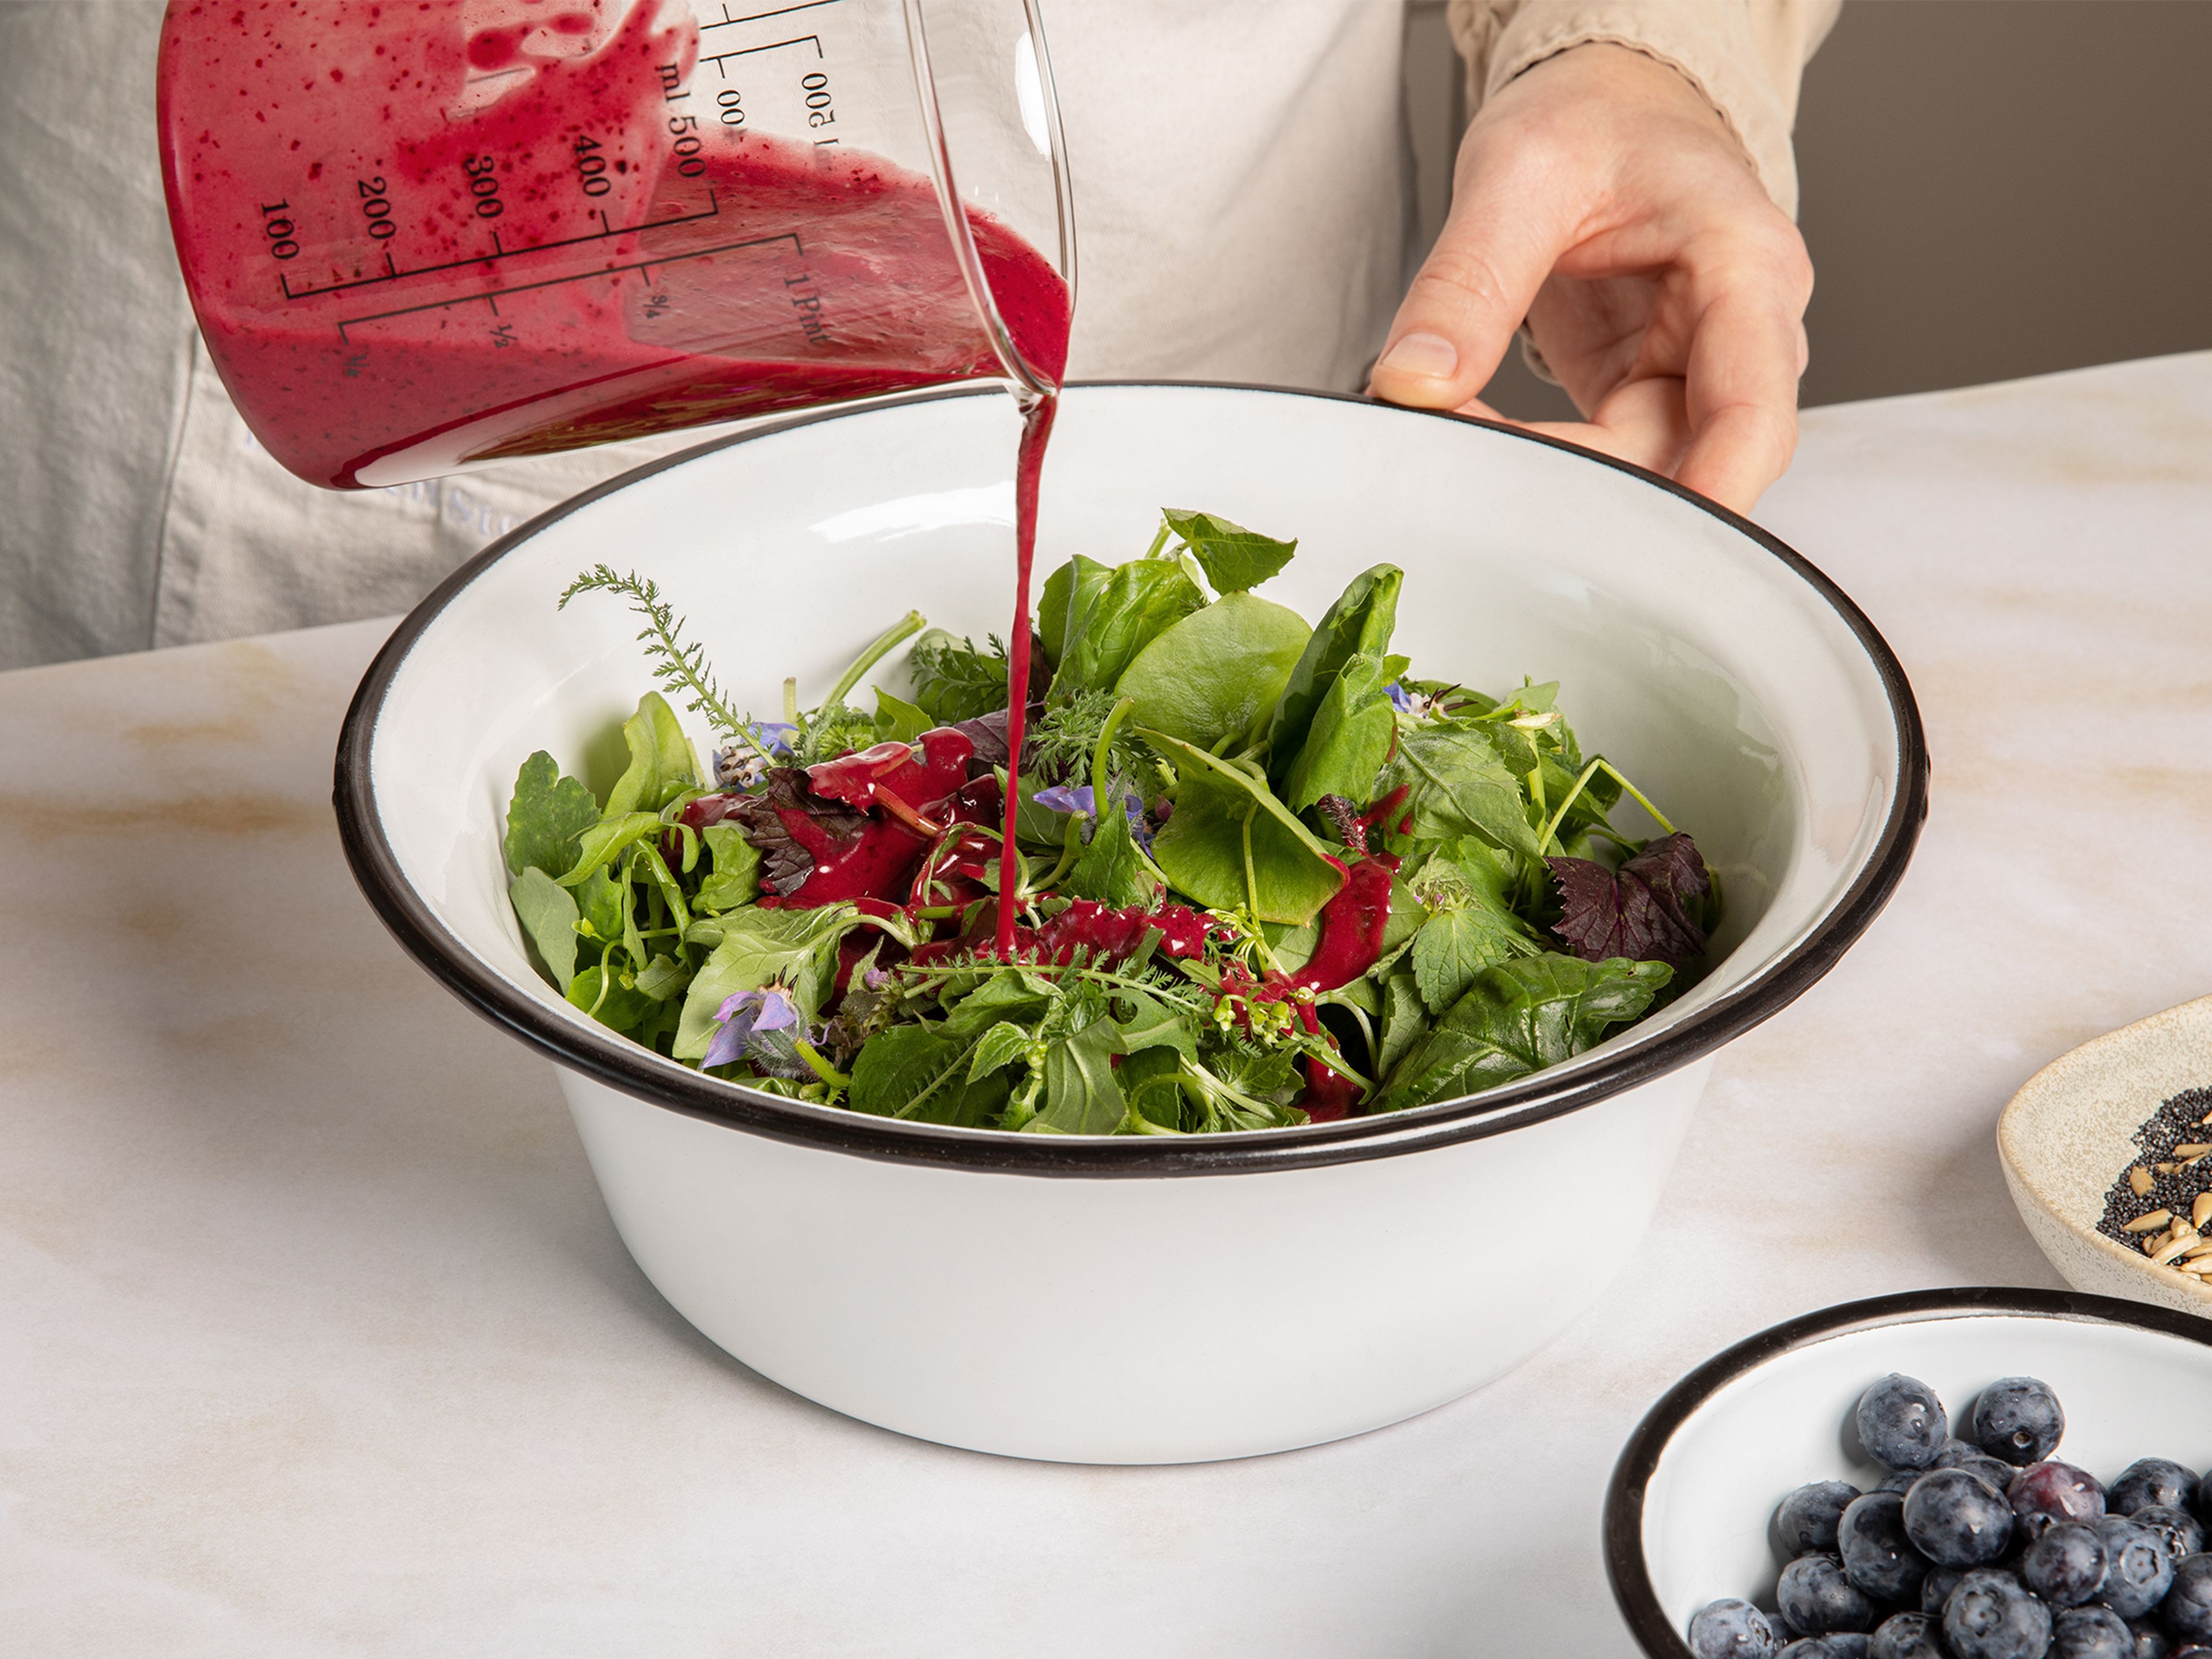 Toast the poppy seeds and sunflower seeds in a grease-free frying pan on medium heat and set aside to cool. Arrange the salad on the serving plate, drizzle the dressing. Top with the mozzarella,  the remaining blueberries, and garnish with the roasted seeds.